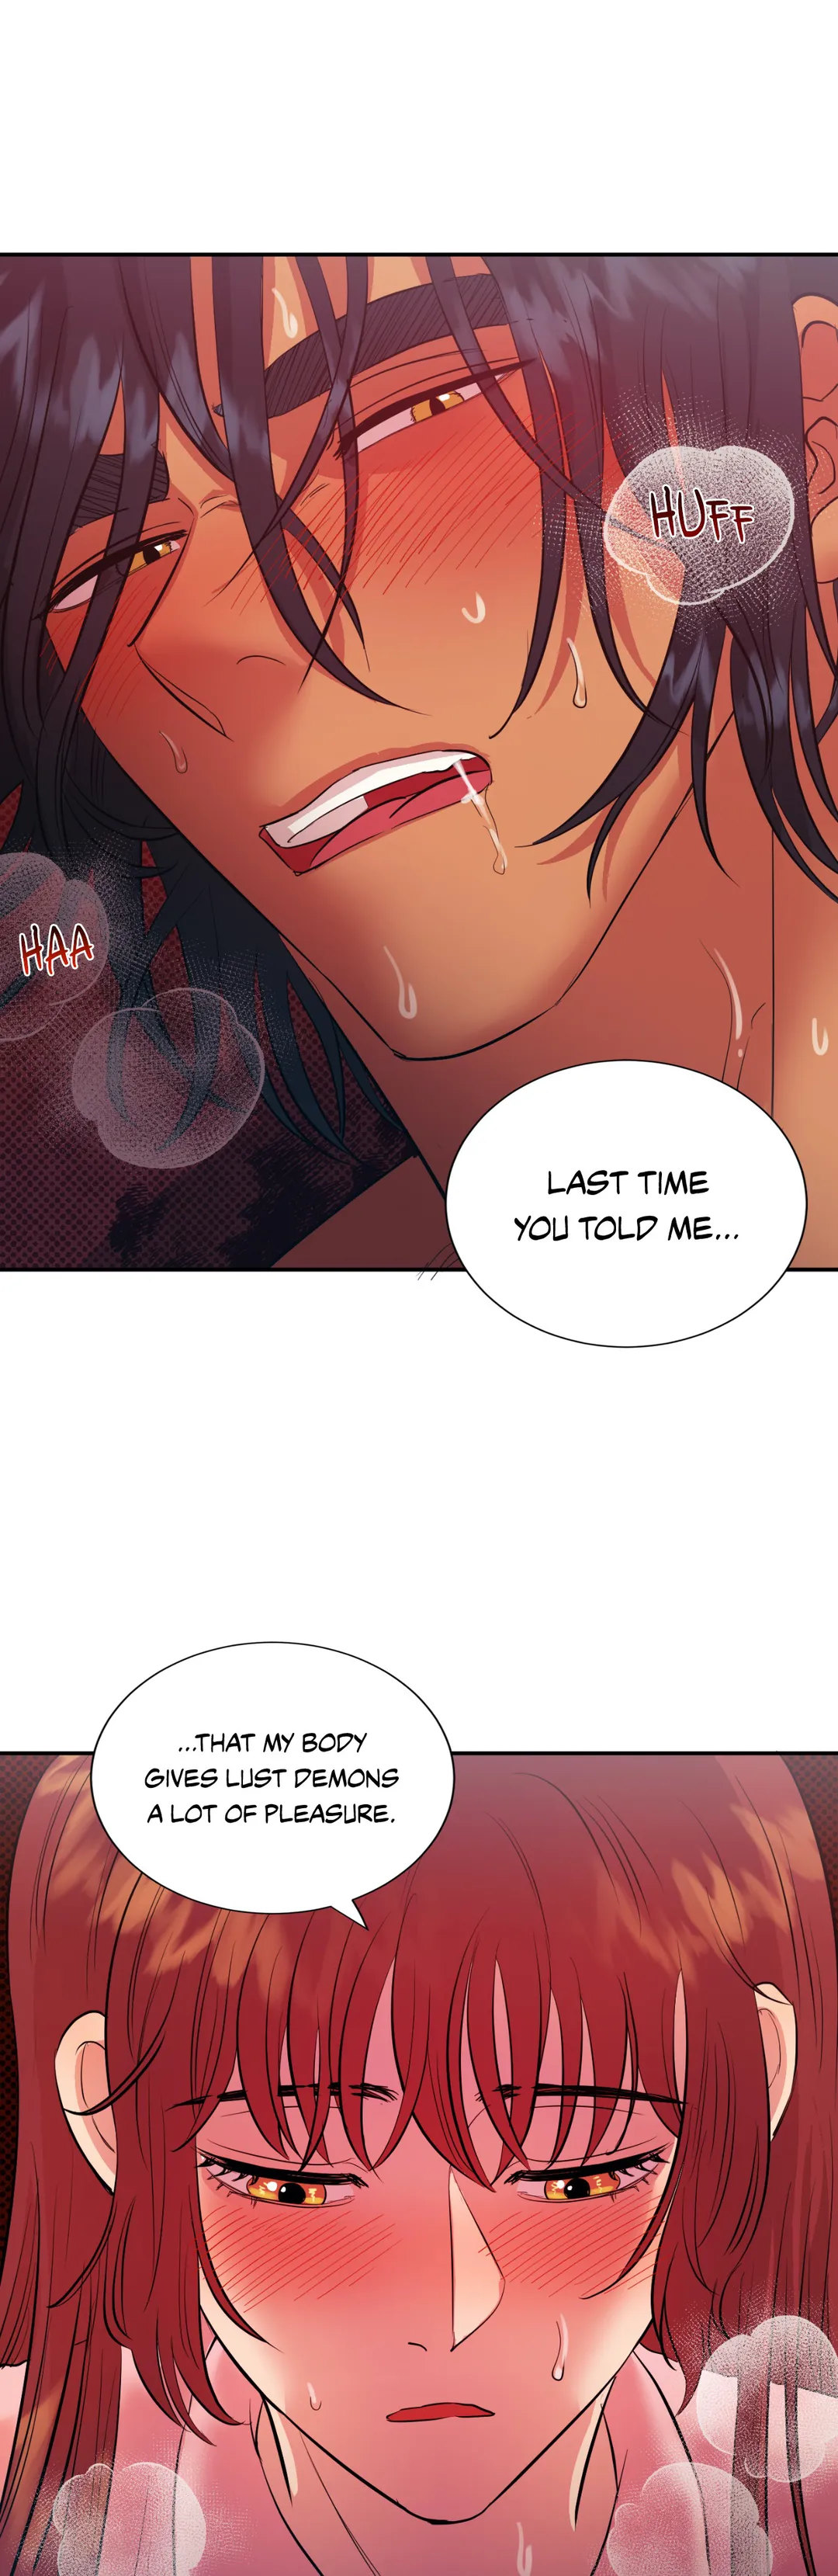 Hana’s Demons of Lust - Chapter 11 Page 28